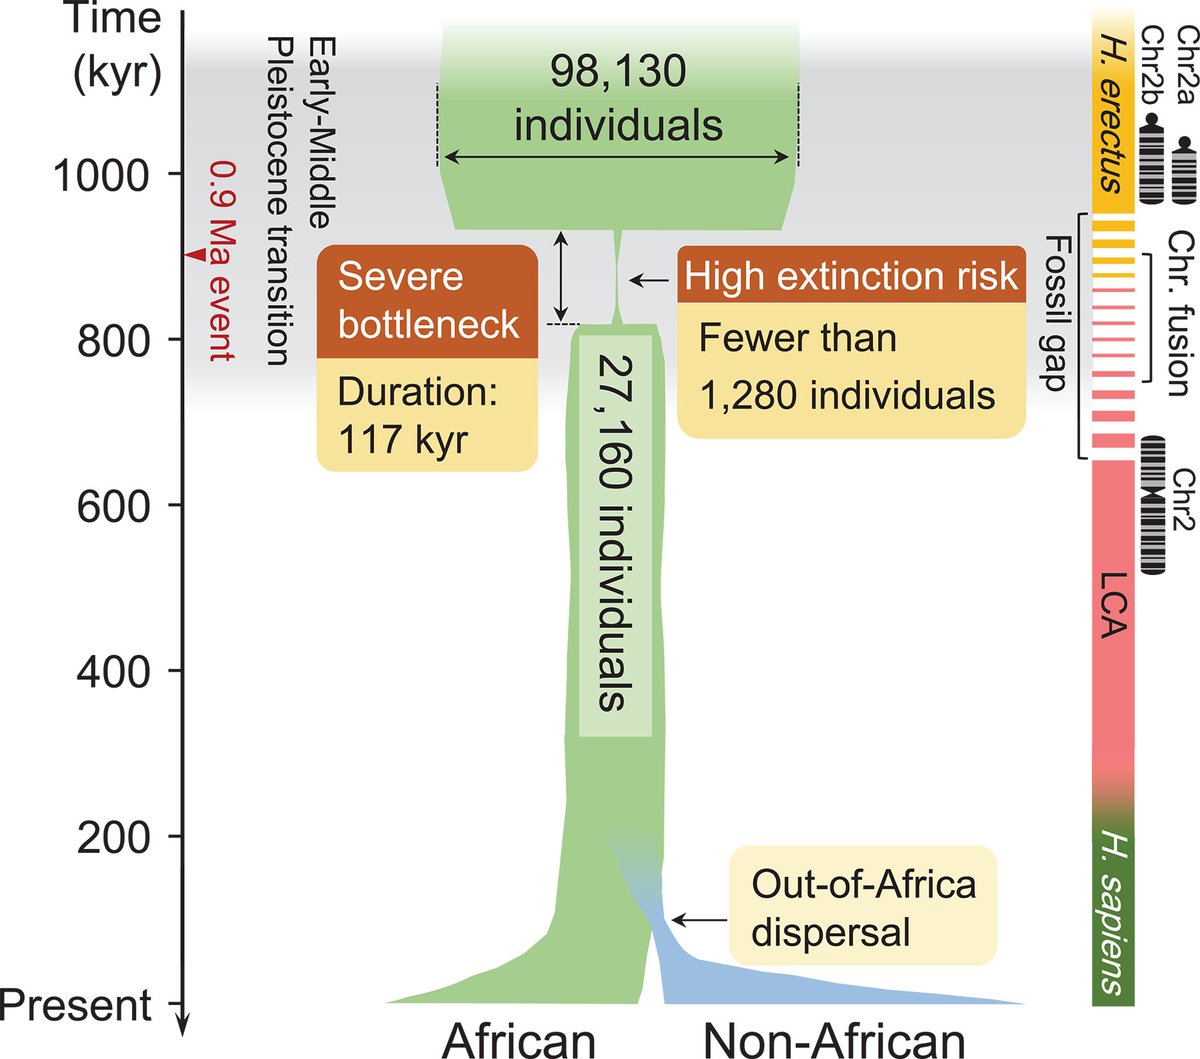 Between 800,000 and 900,000 years ago, the population of human ancestors crashed, according to a new Science study. The results suggest that there were only about 1280 breeding individuals during this transition between the early and middle Pleistocene. scim.ag/3Wl